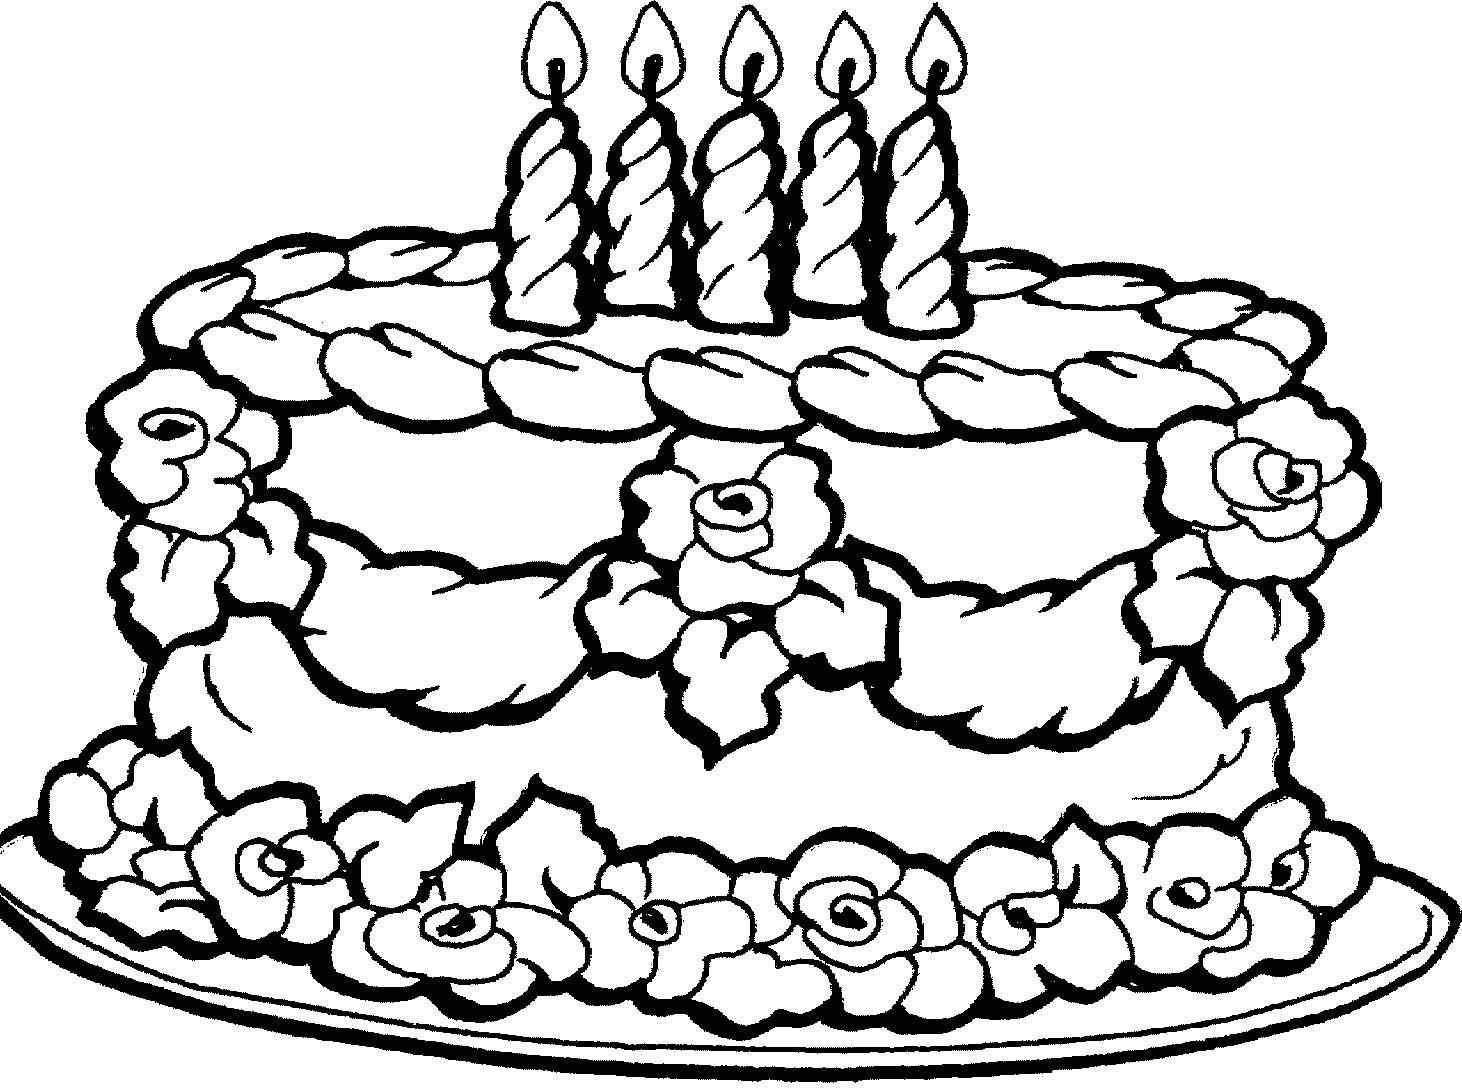 Birthday Cake Coloring Pages - Drawing inspiration